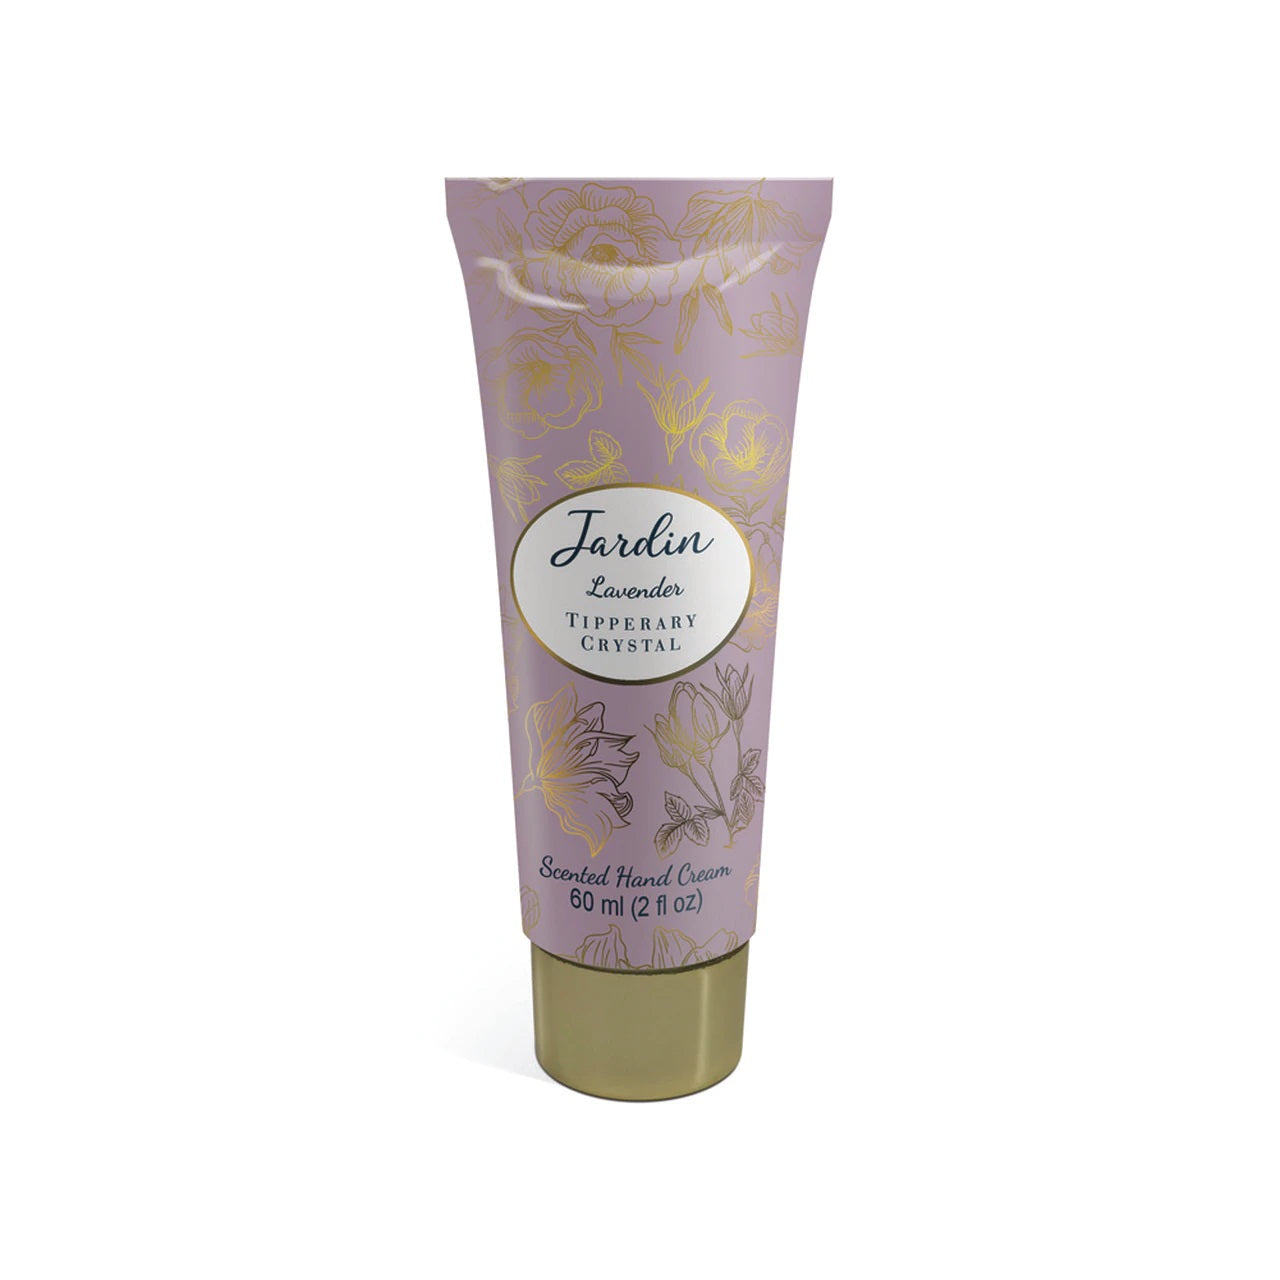 Tipperary Crystal Jardin Handcream - Lavender  Gorgeous Jardin handcreams from Tipperary Crystal are the ultimate pampering treats and would make a lovely gift for someone special. They come presented in a beautiful box. 